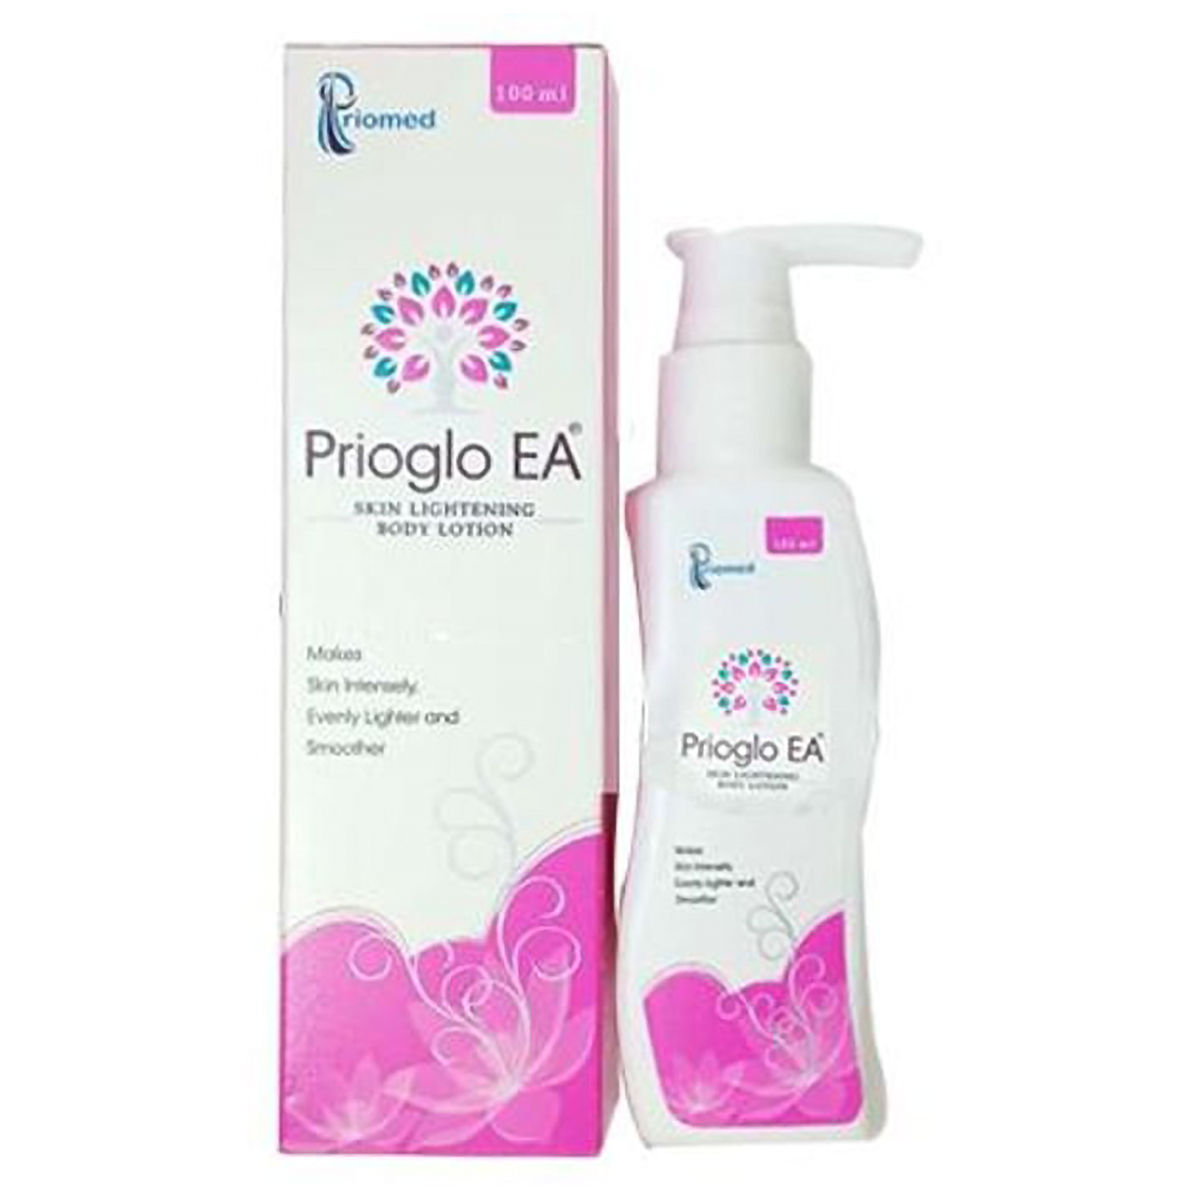 Prioglo EA Body Lotion 100 ml, Pack of 1 